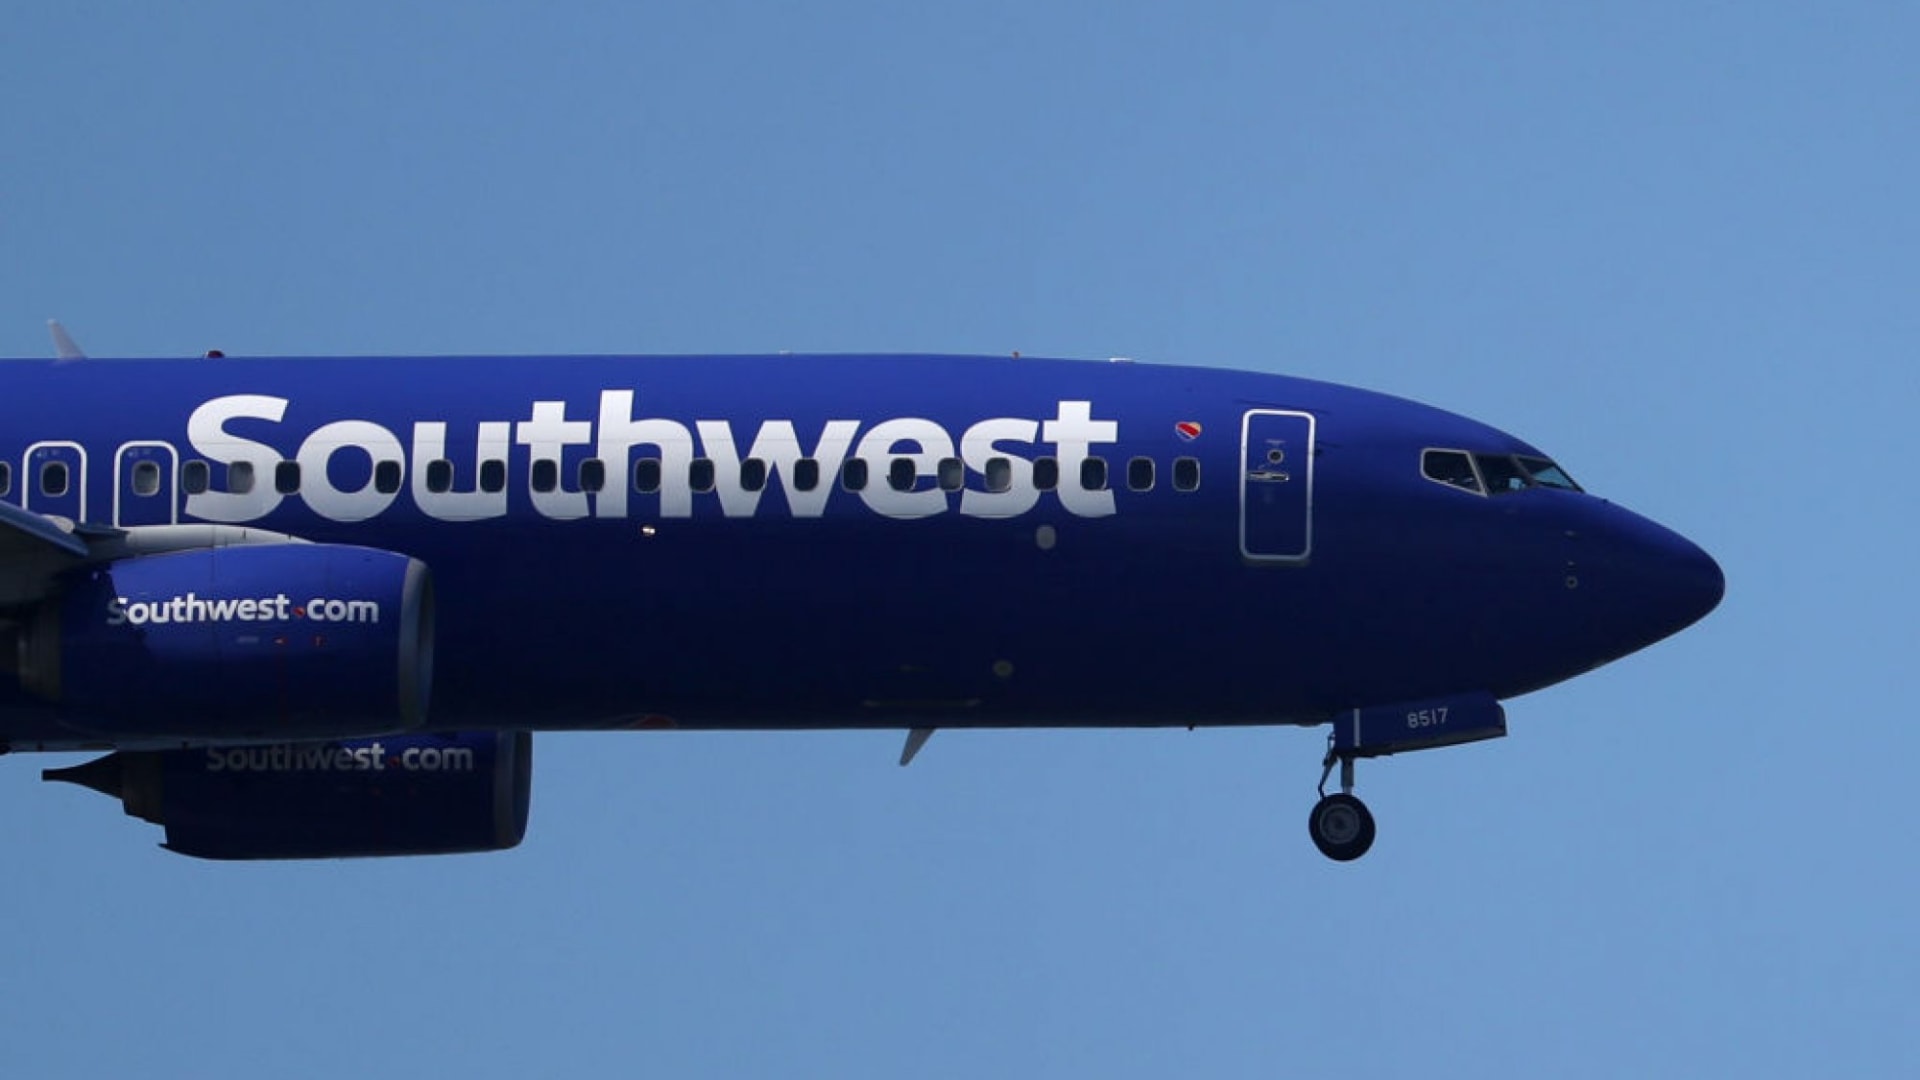 After 17 Years, Southwest Airlines Just Made a Surprising New Decision